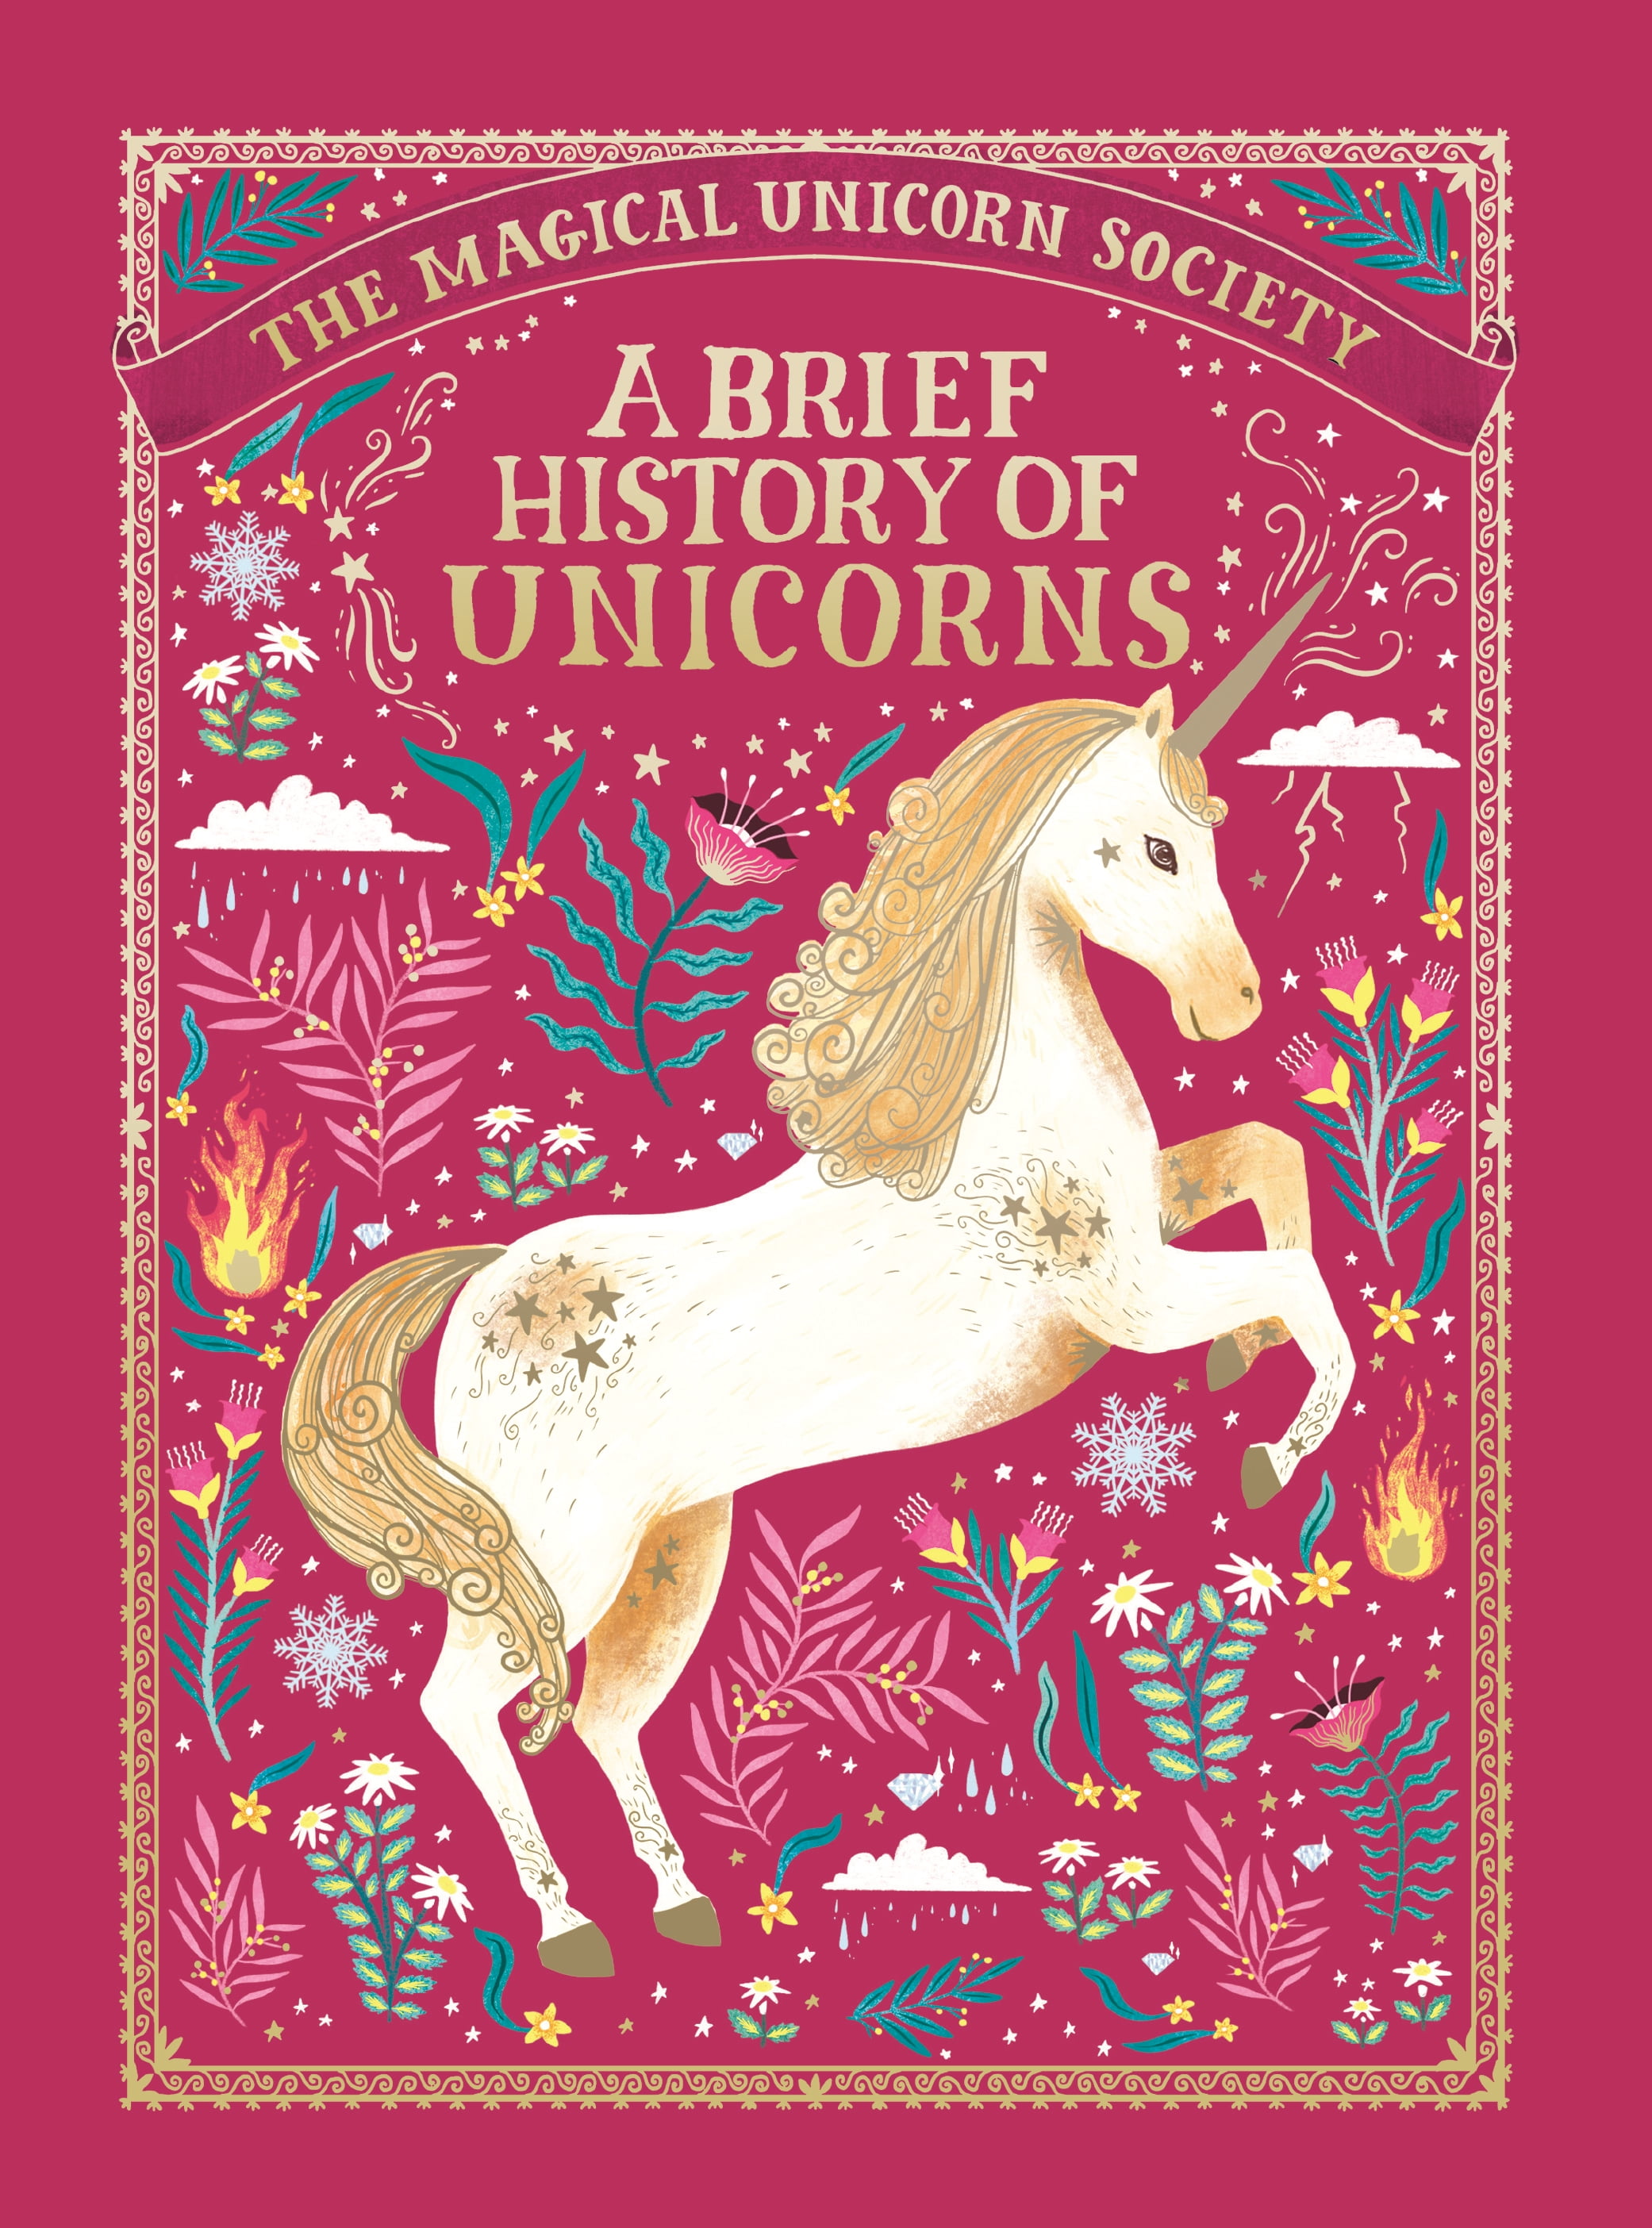 The Magical Unicorn Society Official Handbook by Selwyn E. Phipps